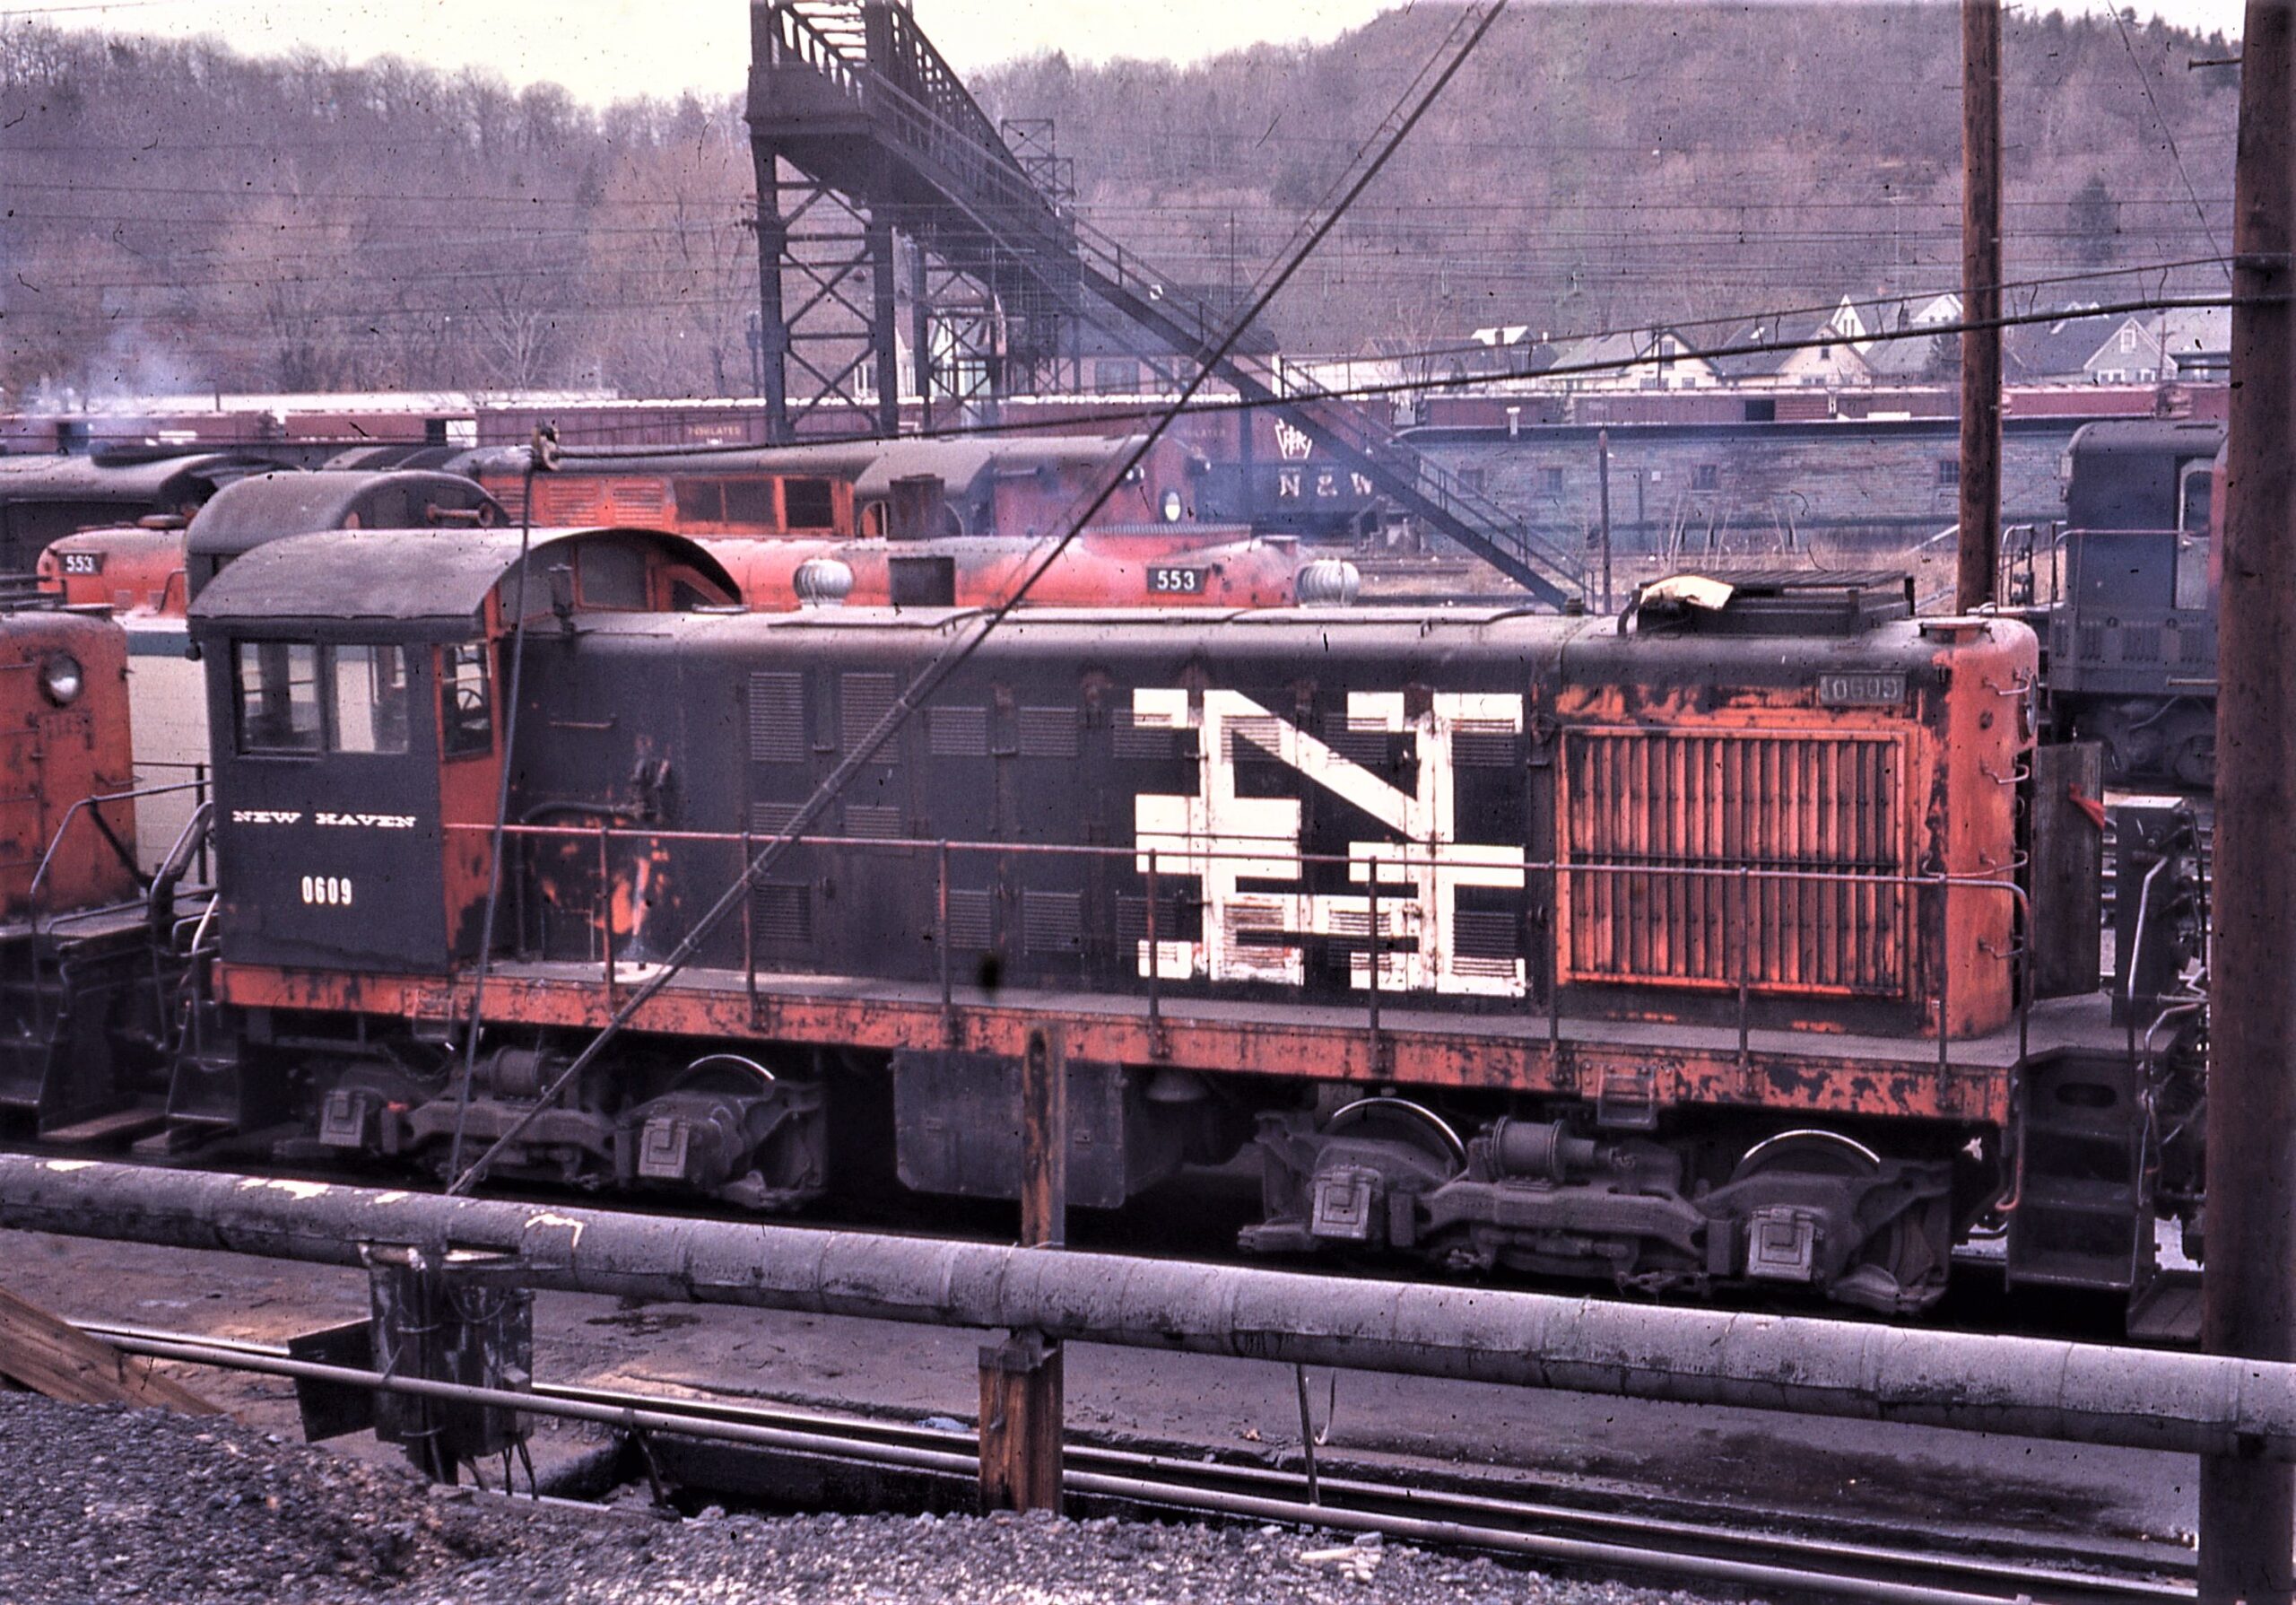 New York New Haven and Hartford Railroad | New Haven | New Haven, Ct. | Cedar Hill Yard | Alco S2 #0609 diesel electric locomotive | February 4, 1967 | W. Trumball phtograph